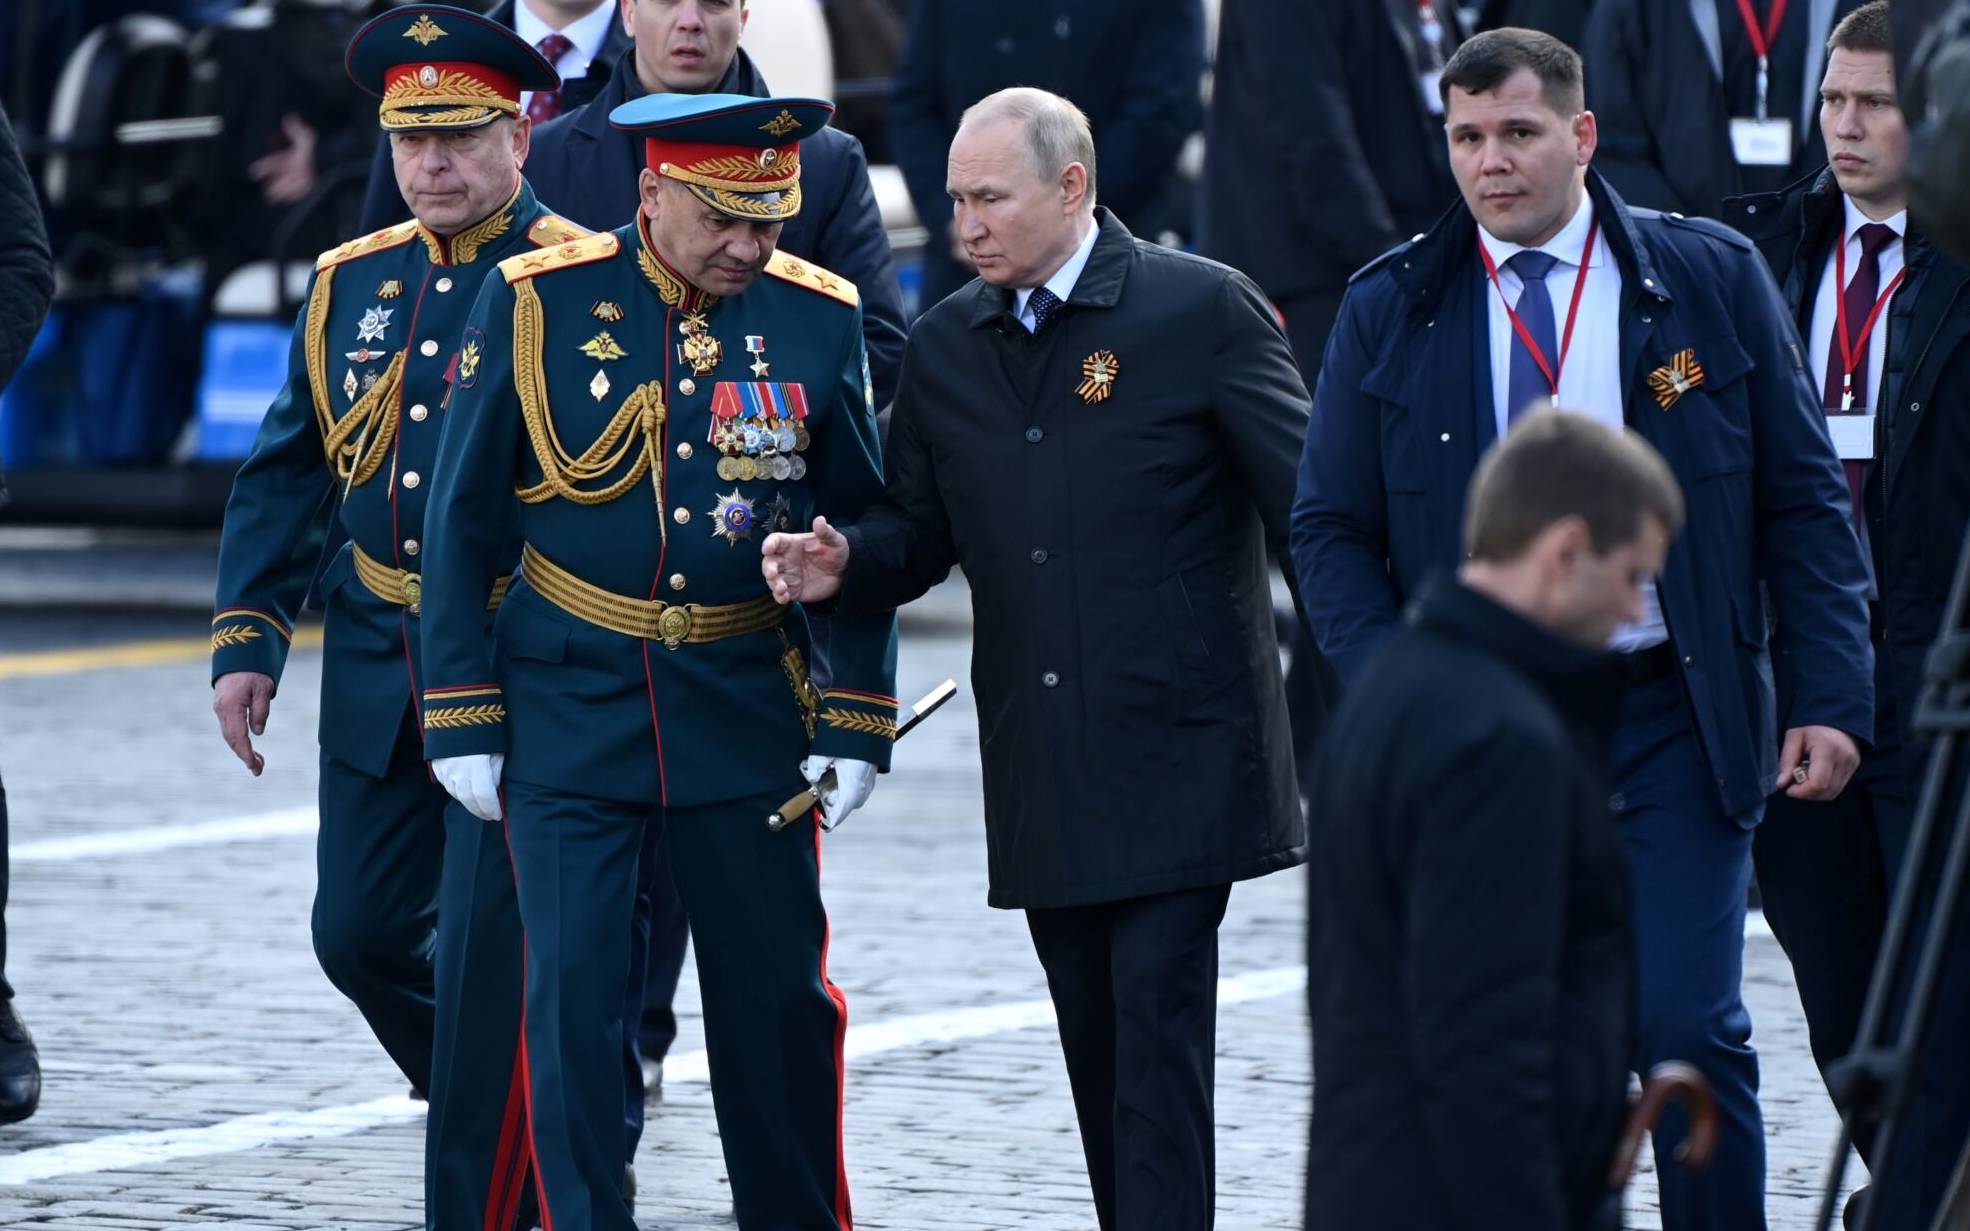 Russian President Vladimir Putin and Defence Minister Sergei Shoigu leave Red Square after the Victory Day military parade in central Moscow on May 9, 2022. - Russia celebrates the 77th anniversary of the victory over Nazi Germany during World War II. (Photo by Kirill KUDRYAVTSEV / AFP)